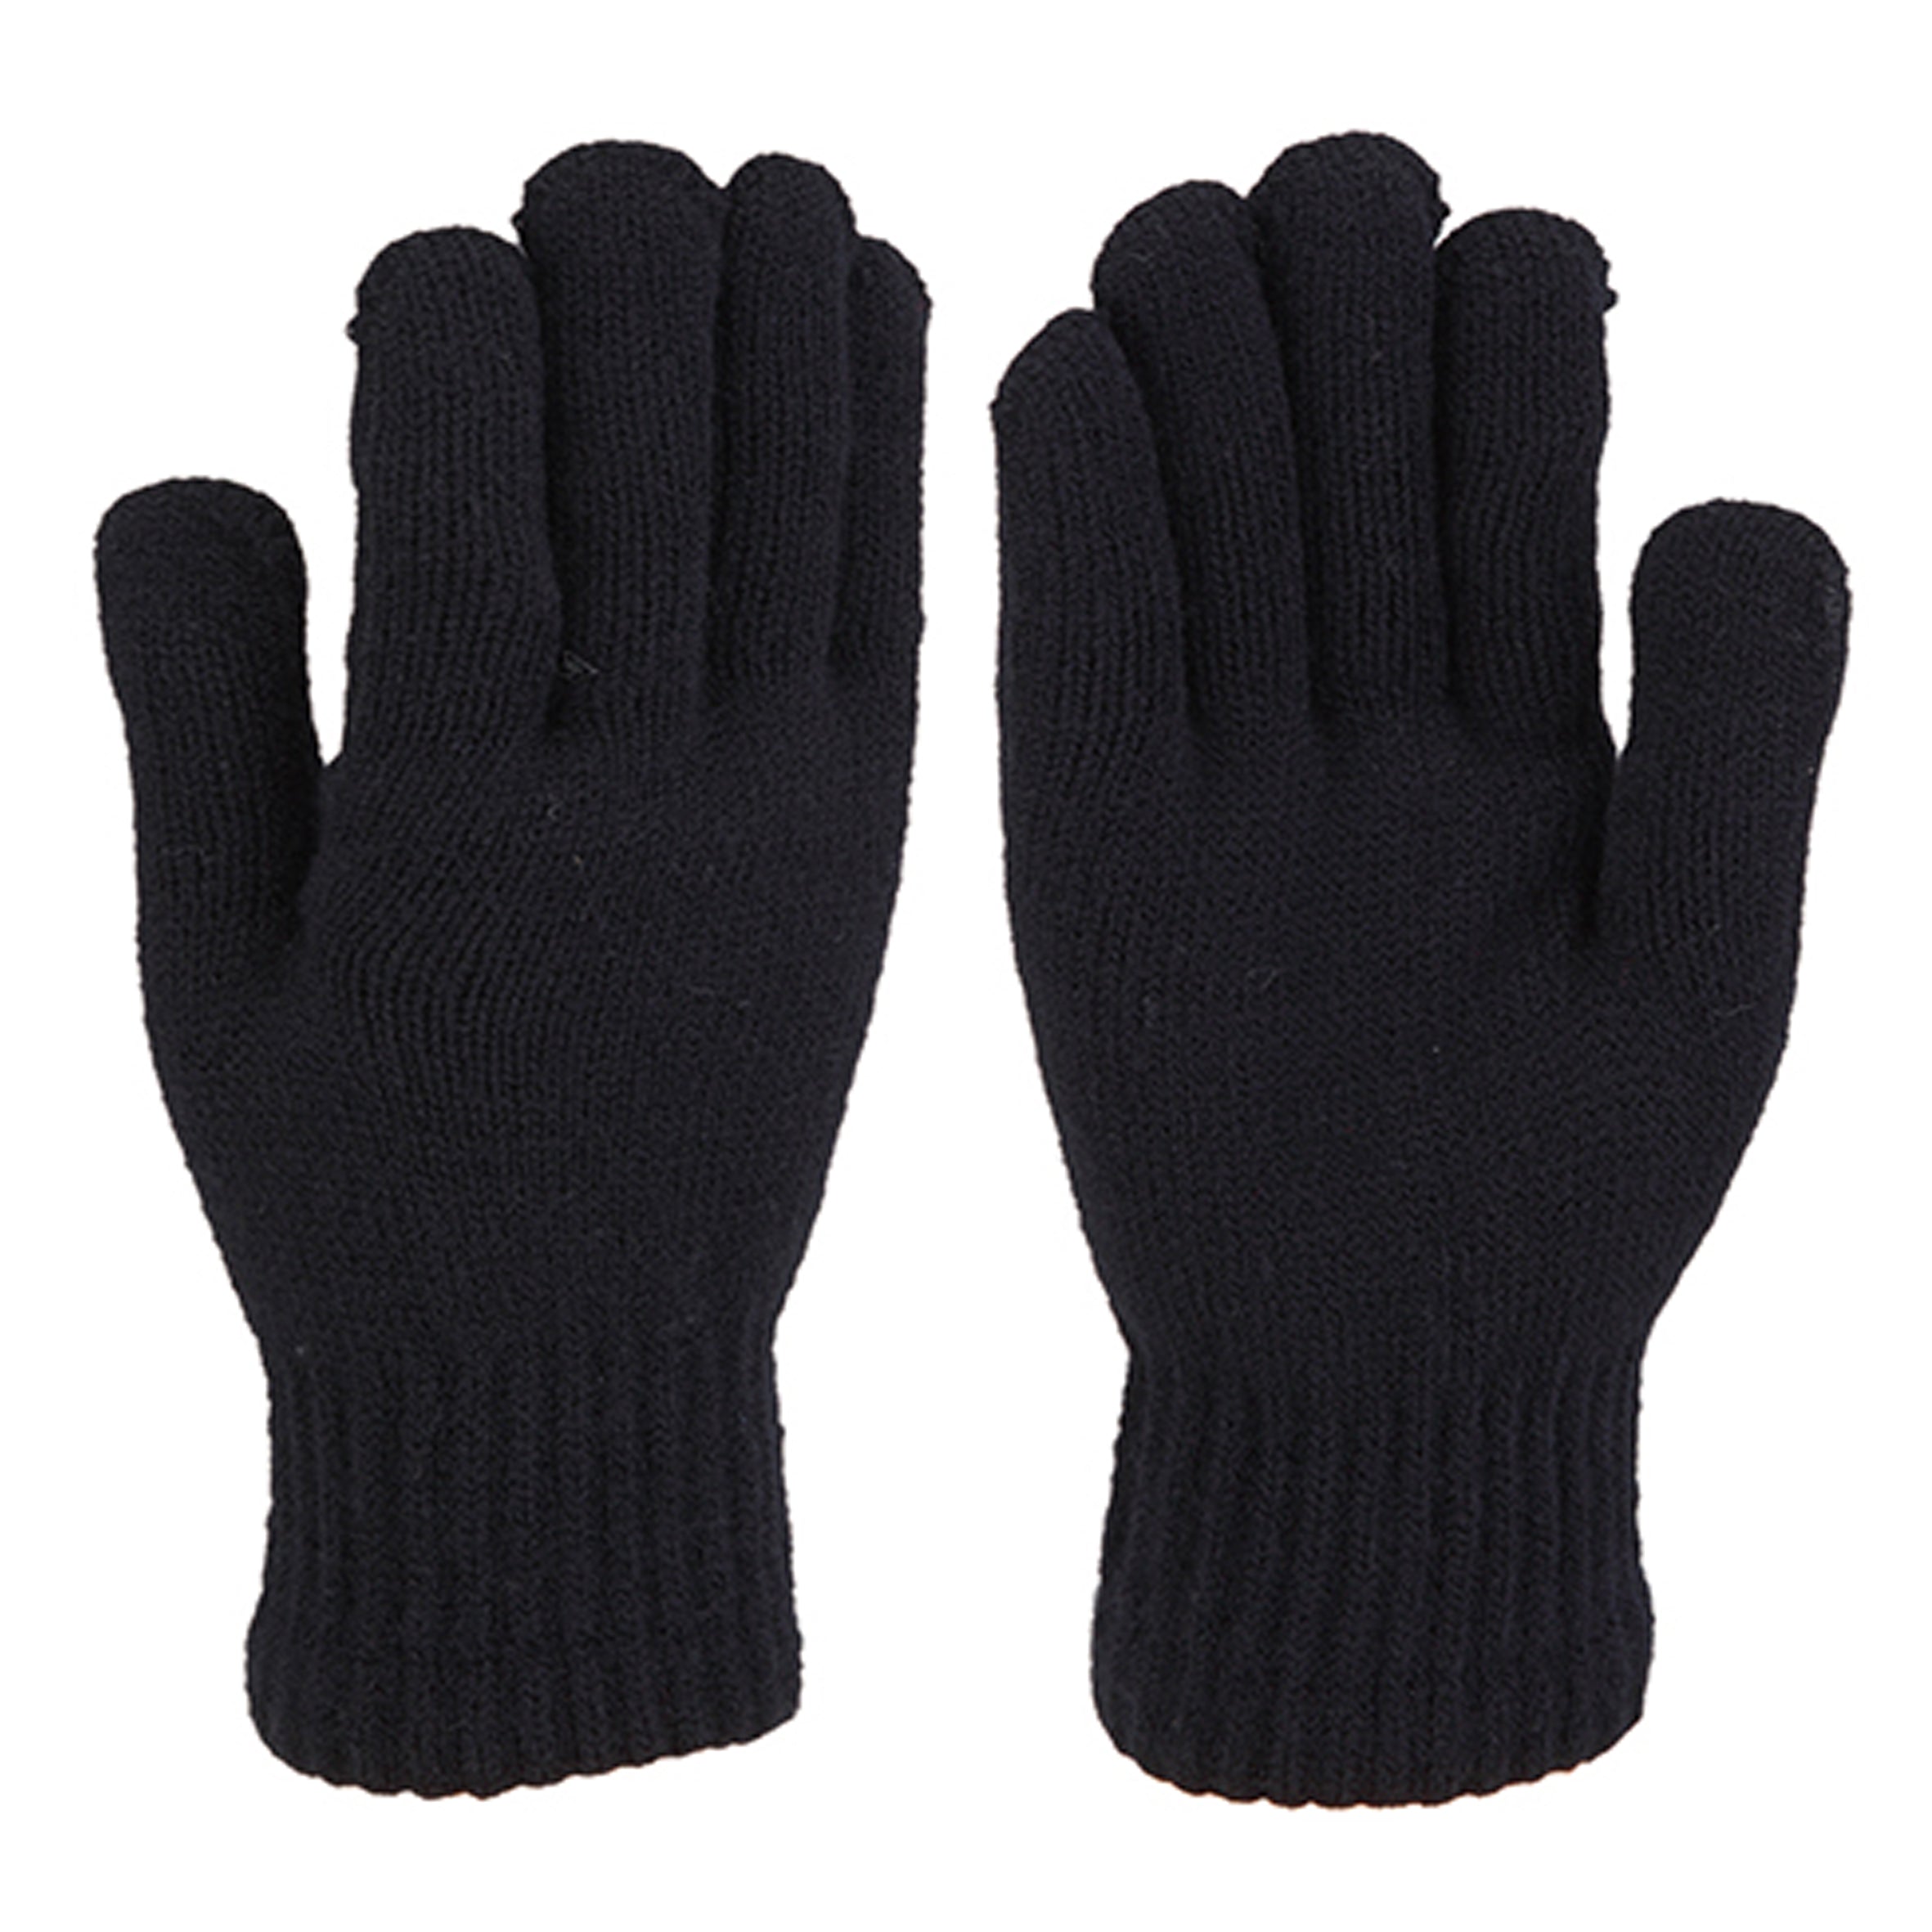 Wholesale CLOTHING Accessories Black Gloves With Fur Inside NH234